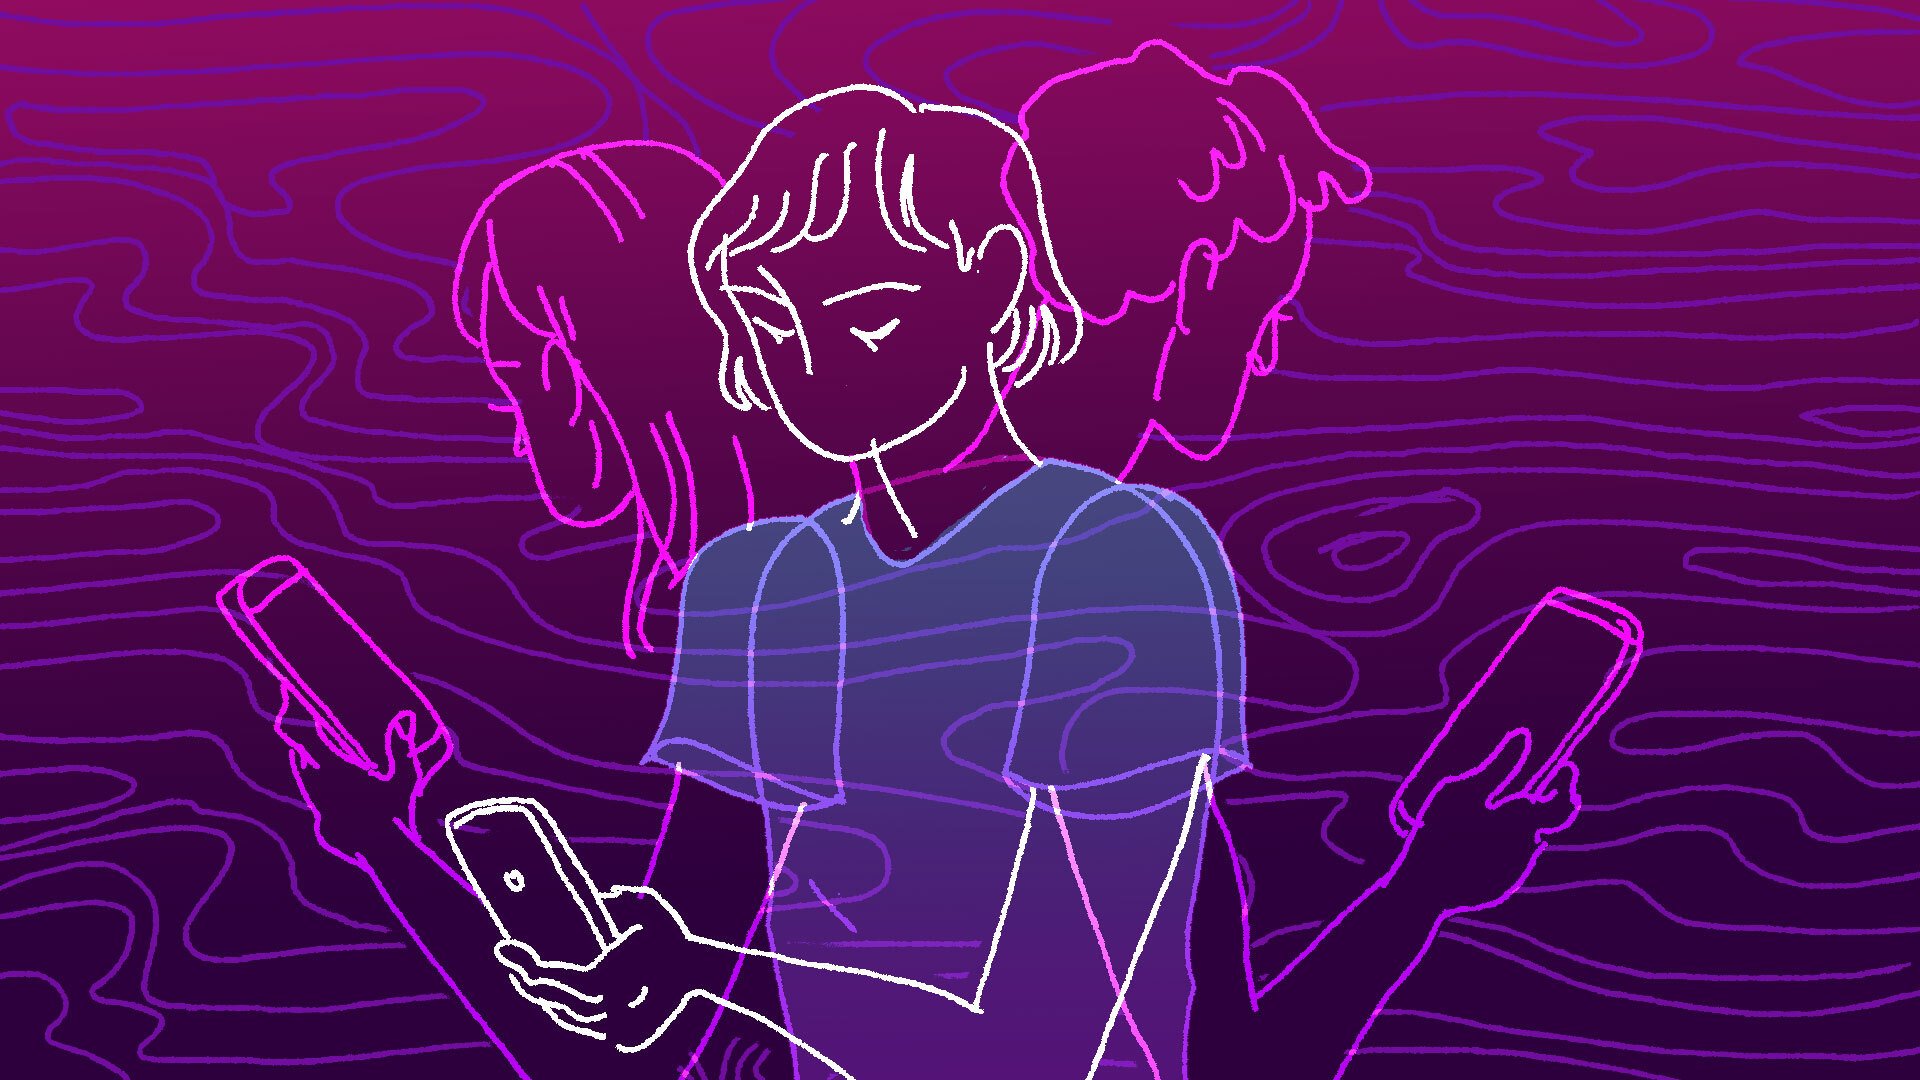 An illustration showing three people looking at their phones with their backs to each other,